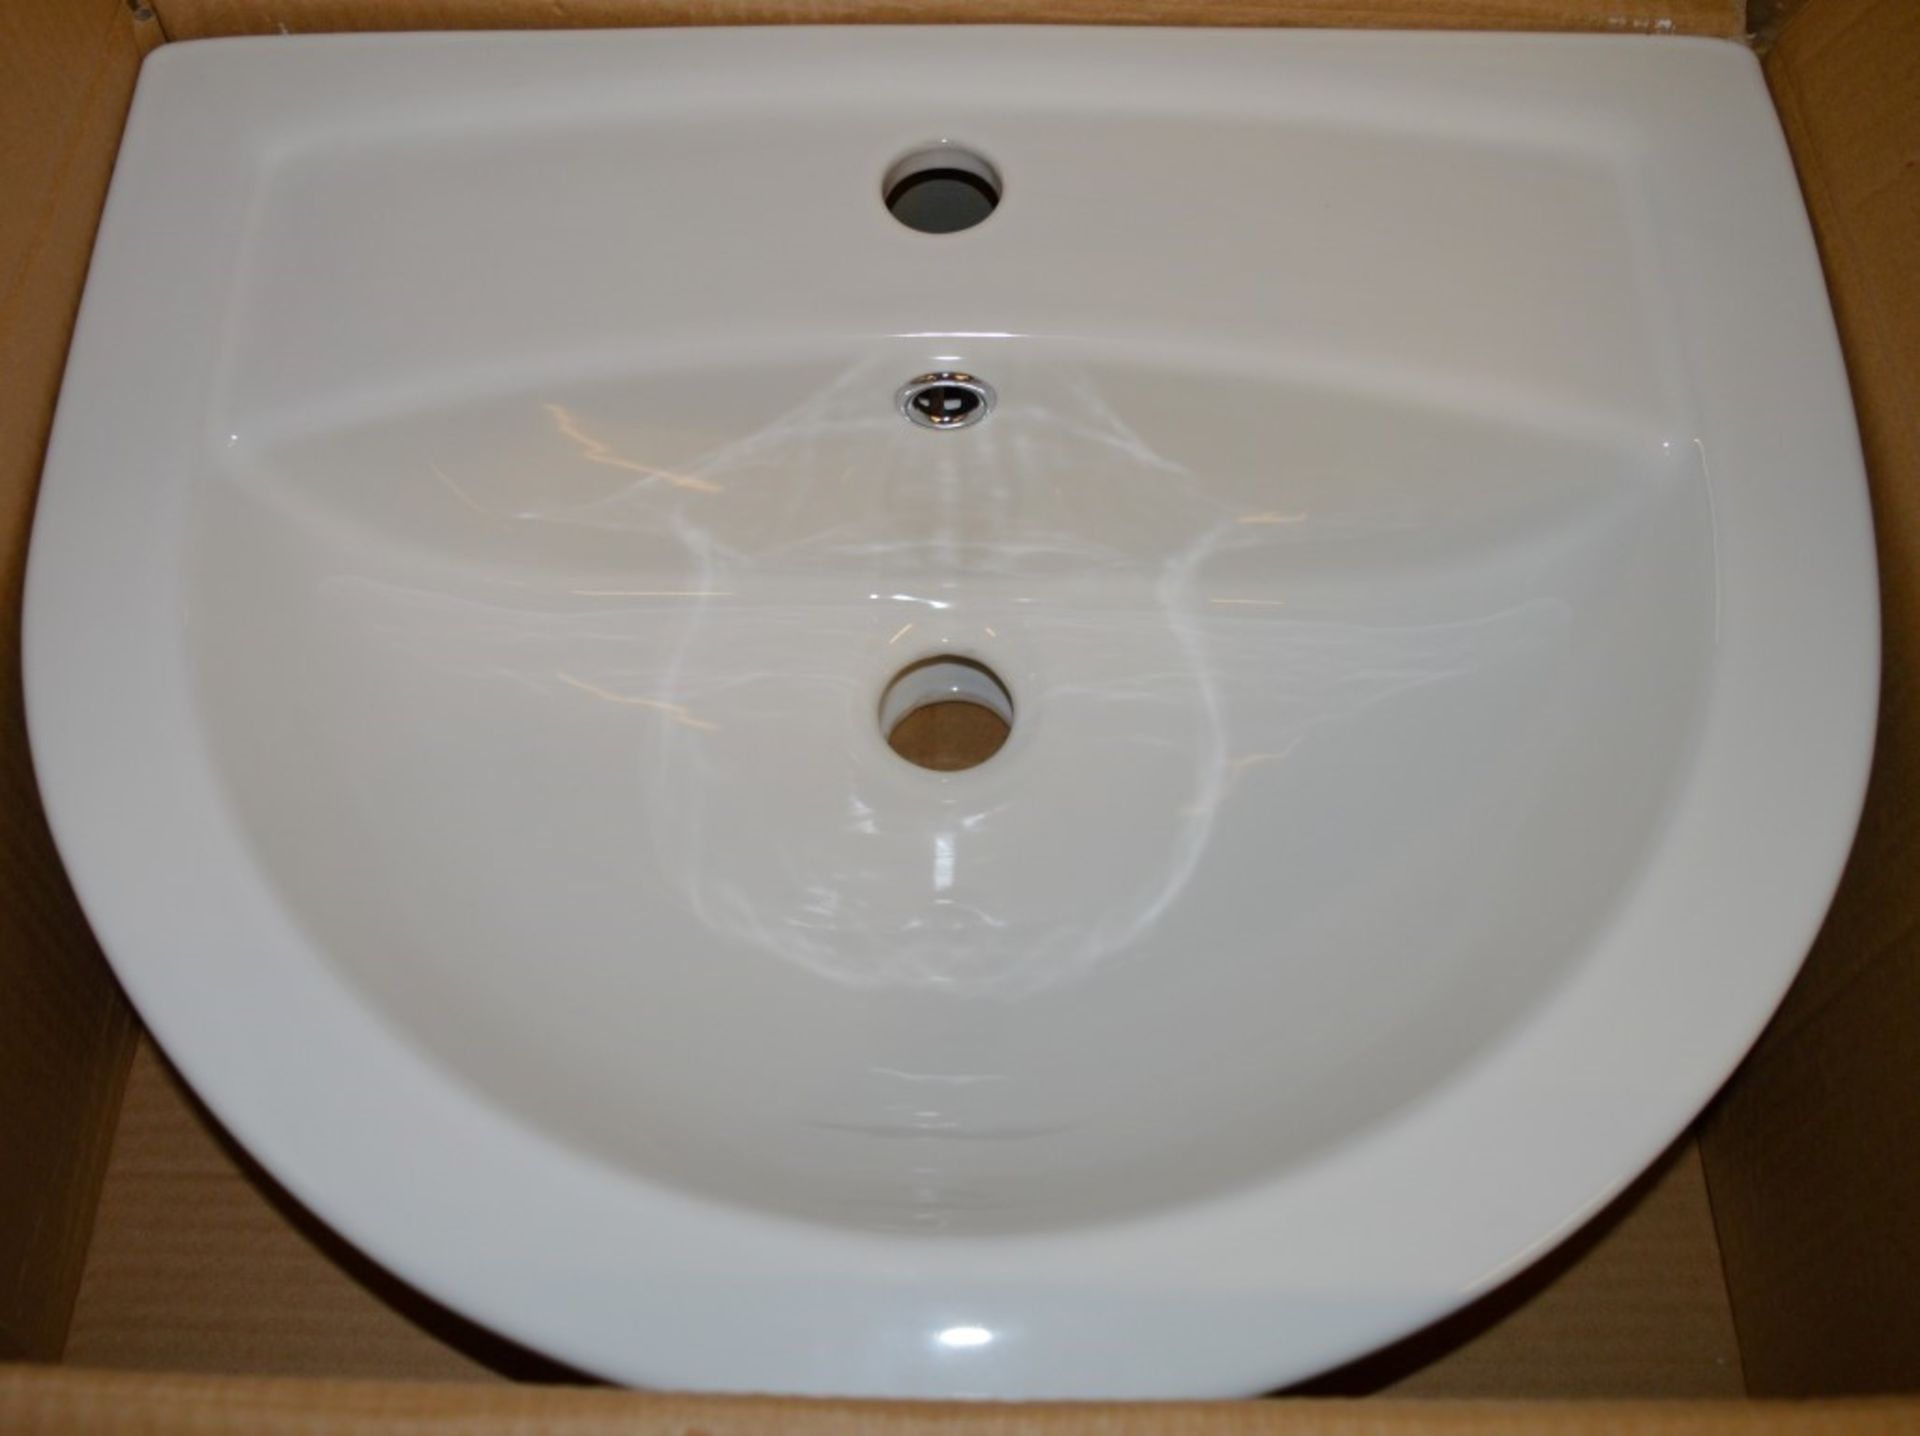 20 x Vogue Bathrooms ZOE Single Tap Hole SEMI RECEESED SINK BASIN - 500mm Width - Brand New Boxed